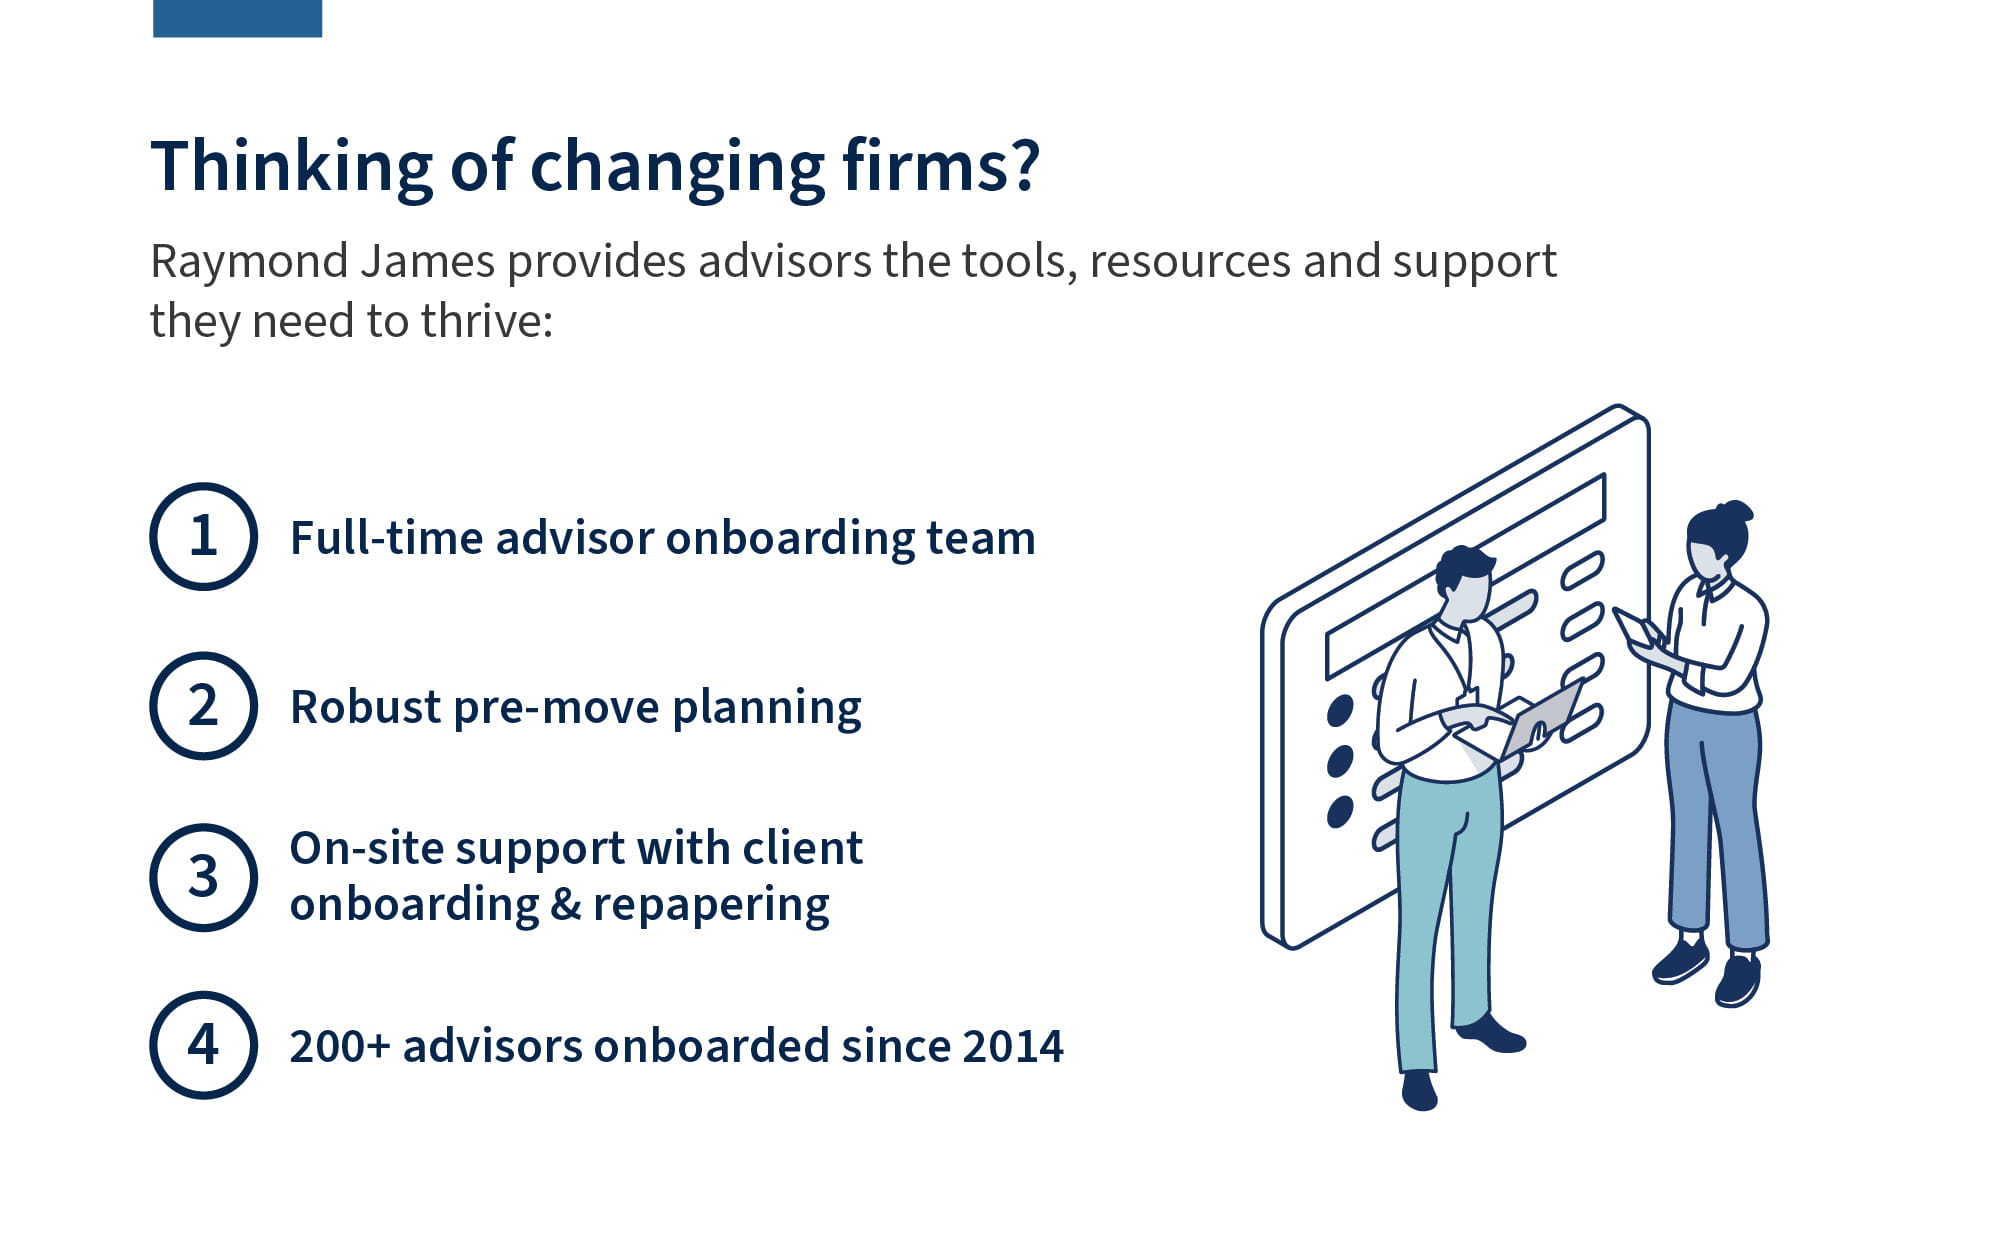 Thinking of changing firms? Raymond James provides advisors the tools, resources and support they need to thrive: 1.	Full-time advisor onboarding team 2.	Robust pre-move planning 3.	On-site support with client onboarding and repapering  4.	200+ advisors onboarded since 2014